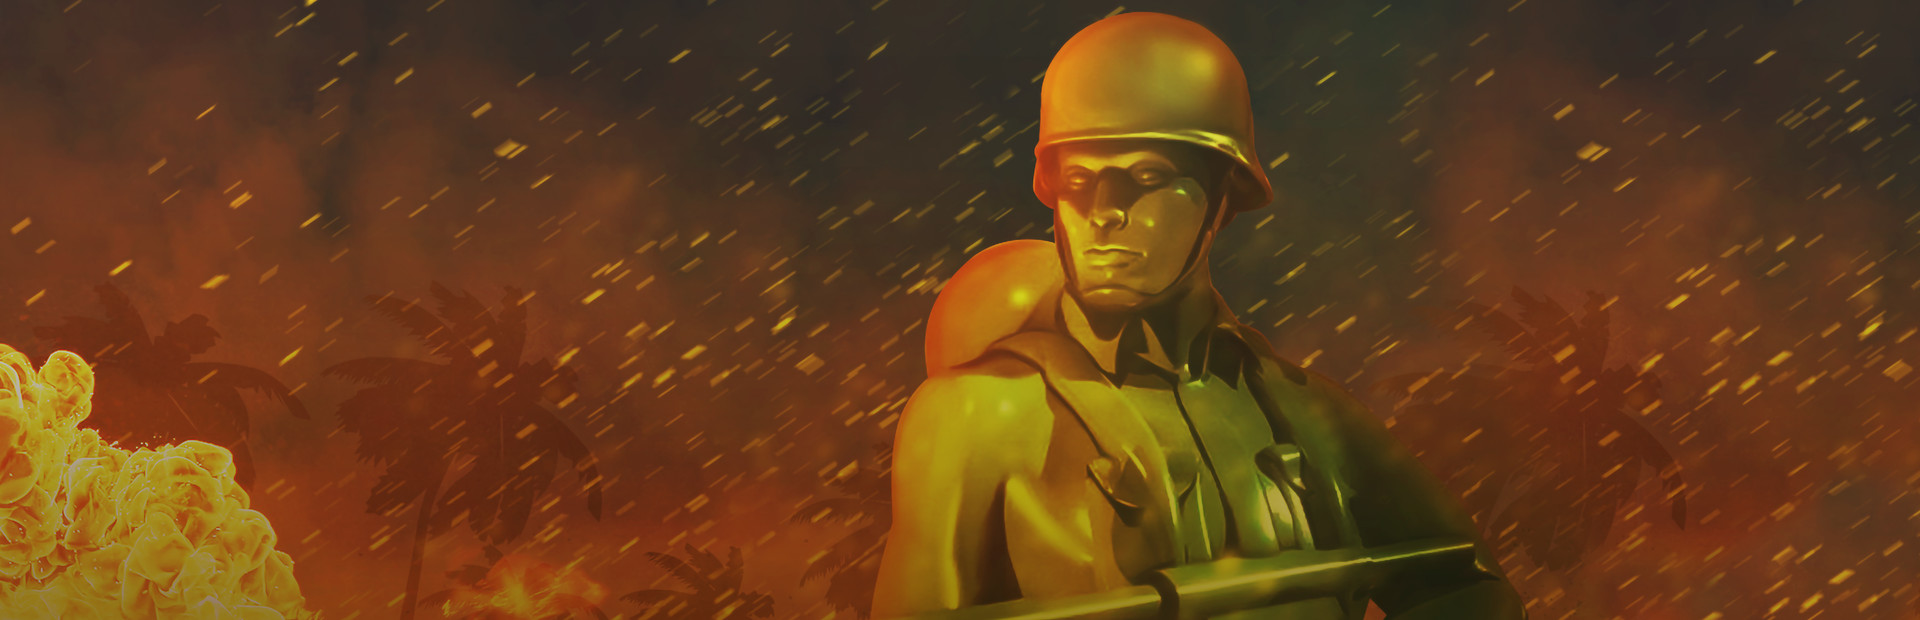 Army Men II cover image